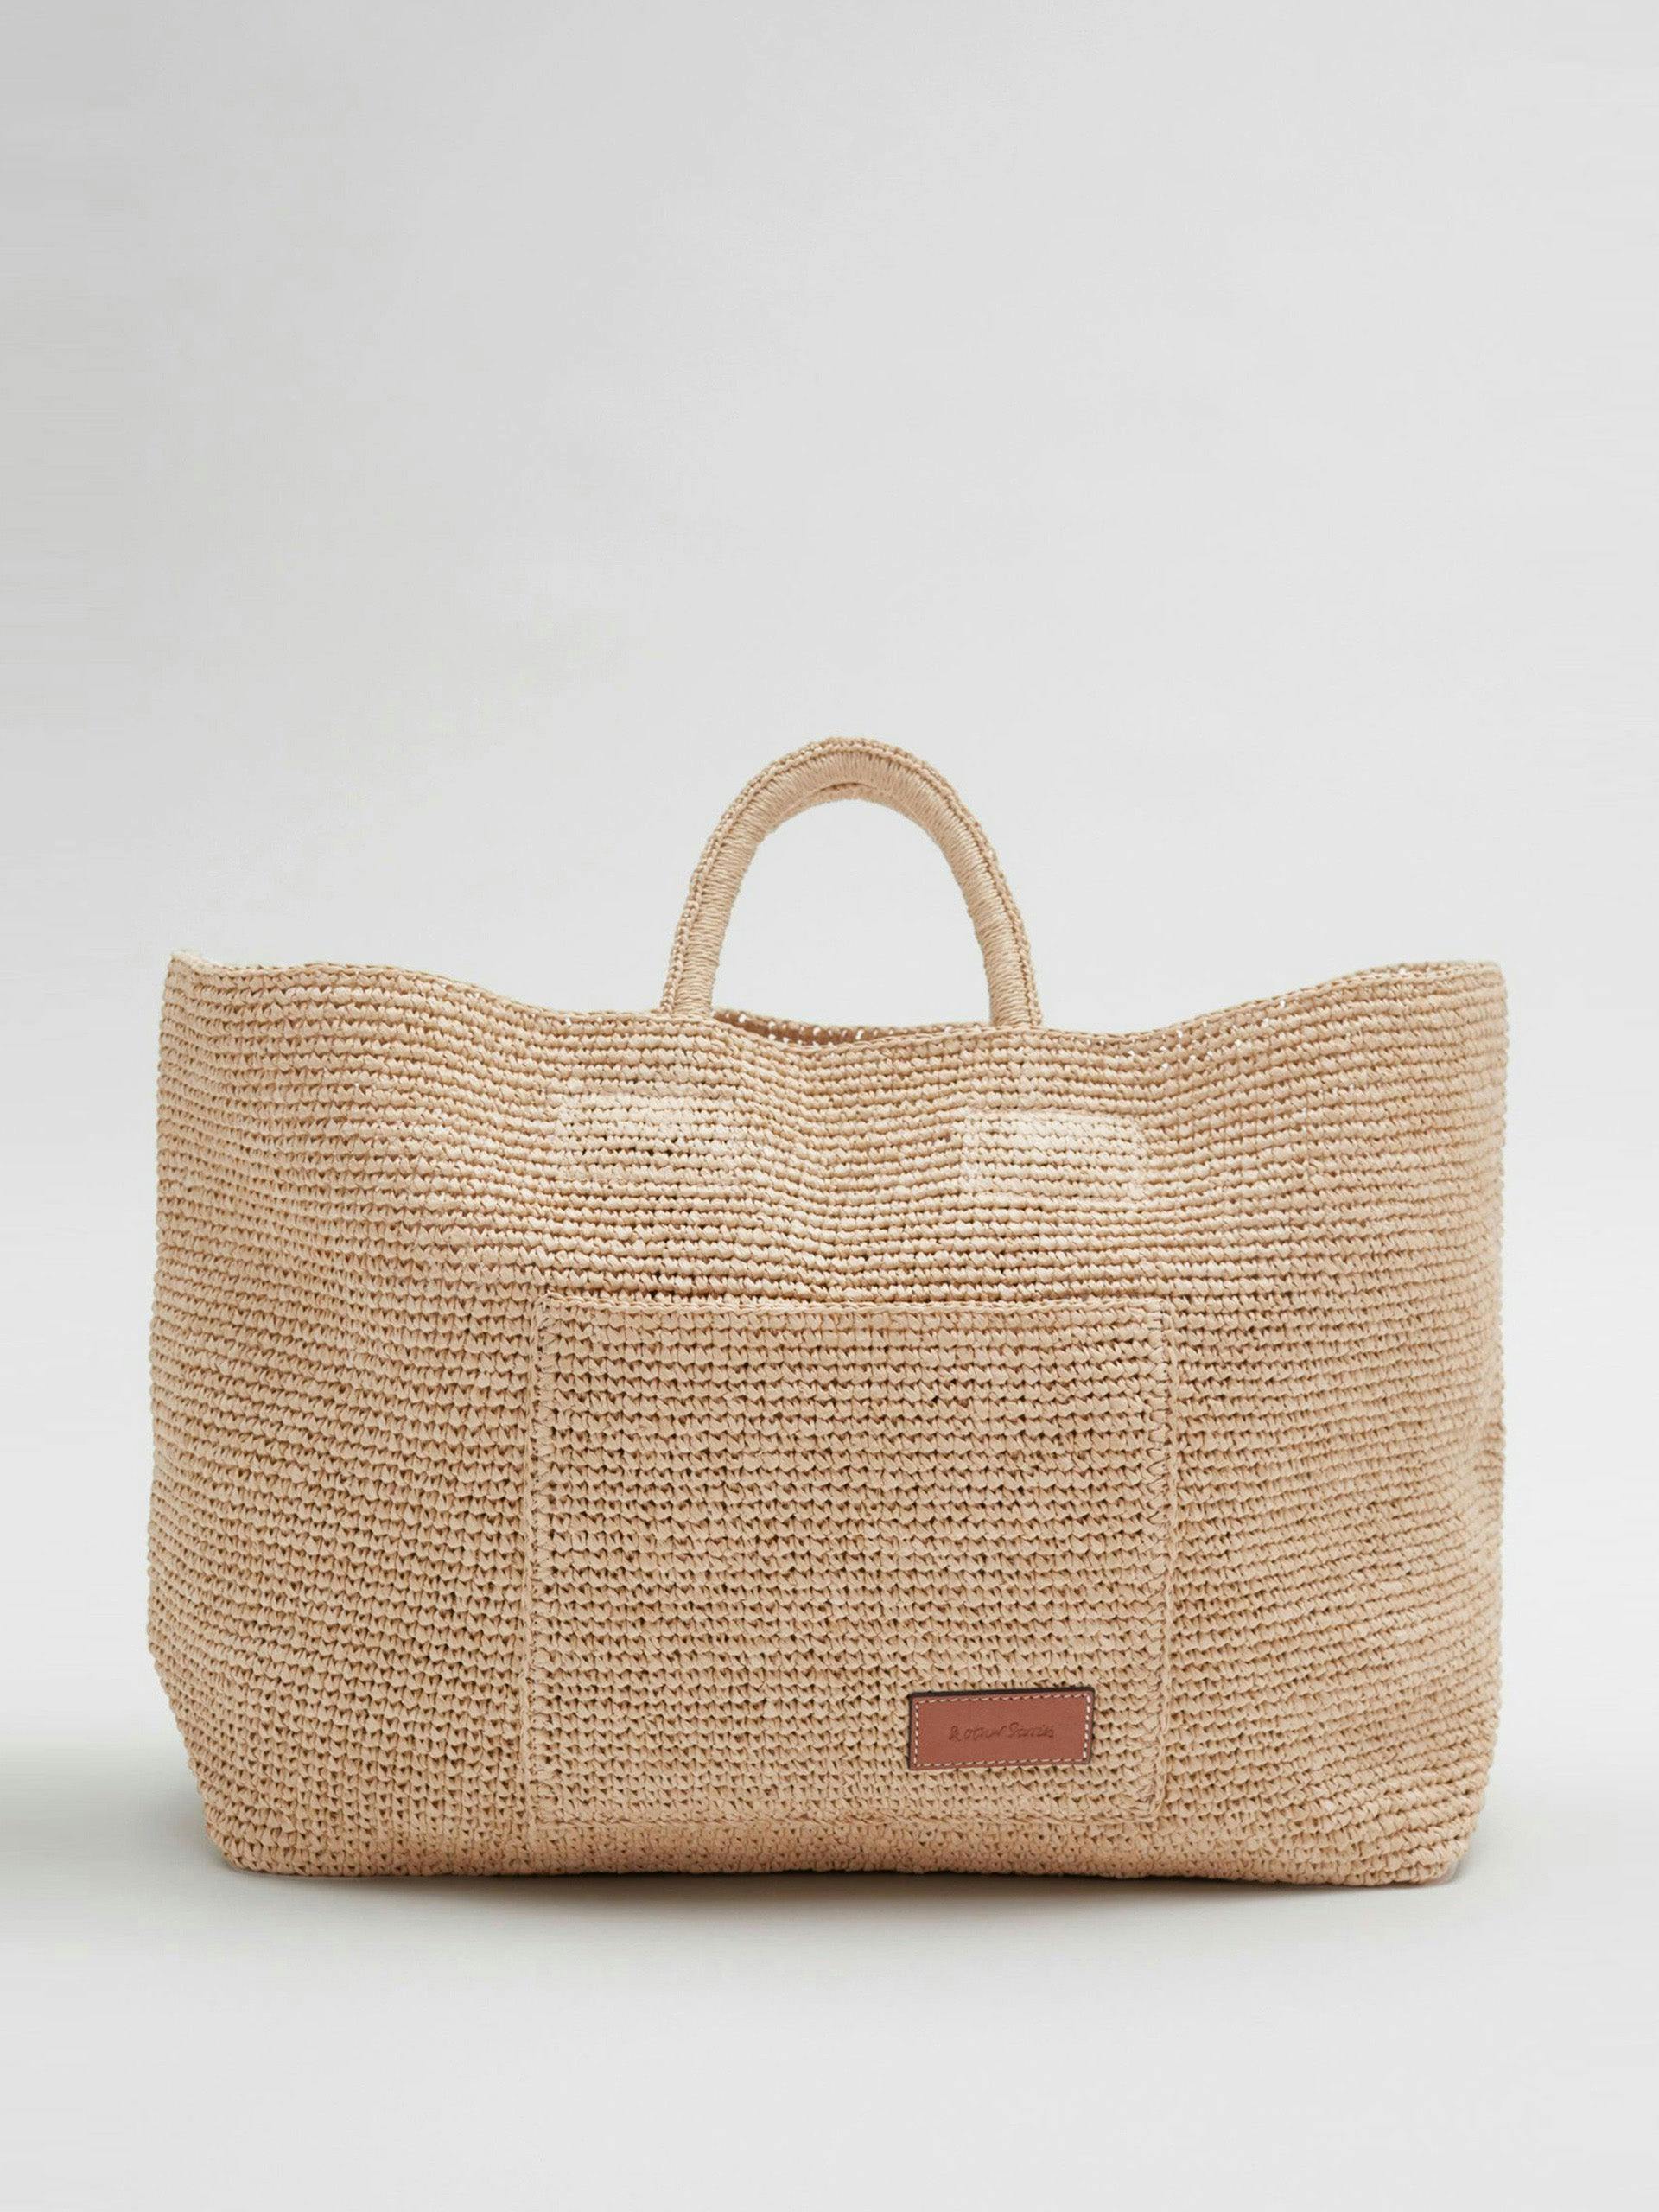 Large woven straw tote